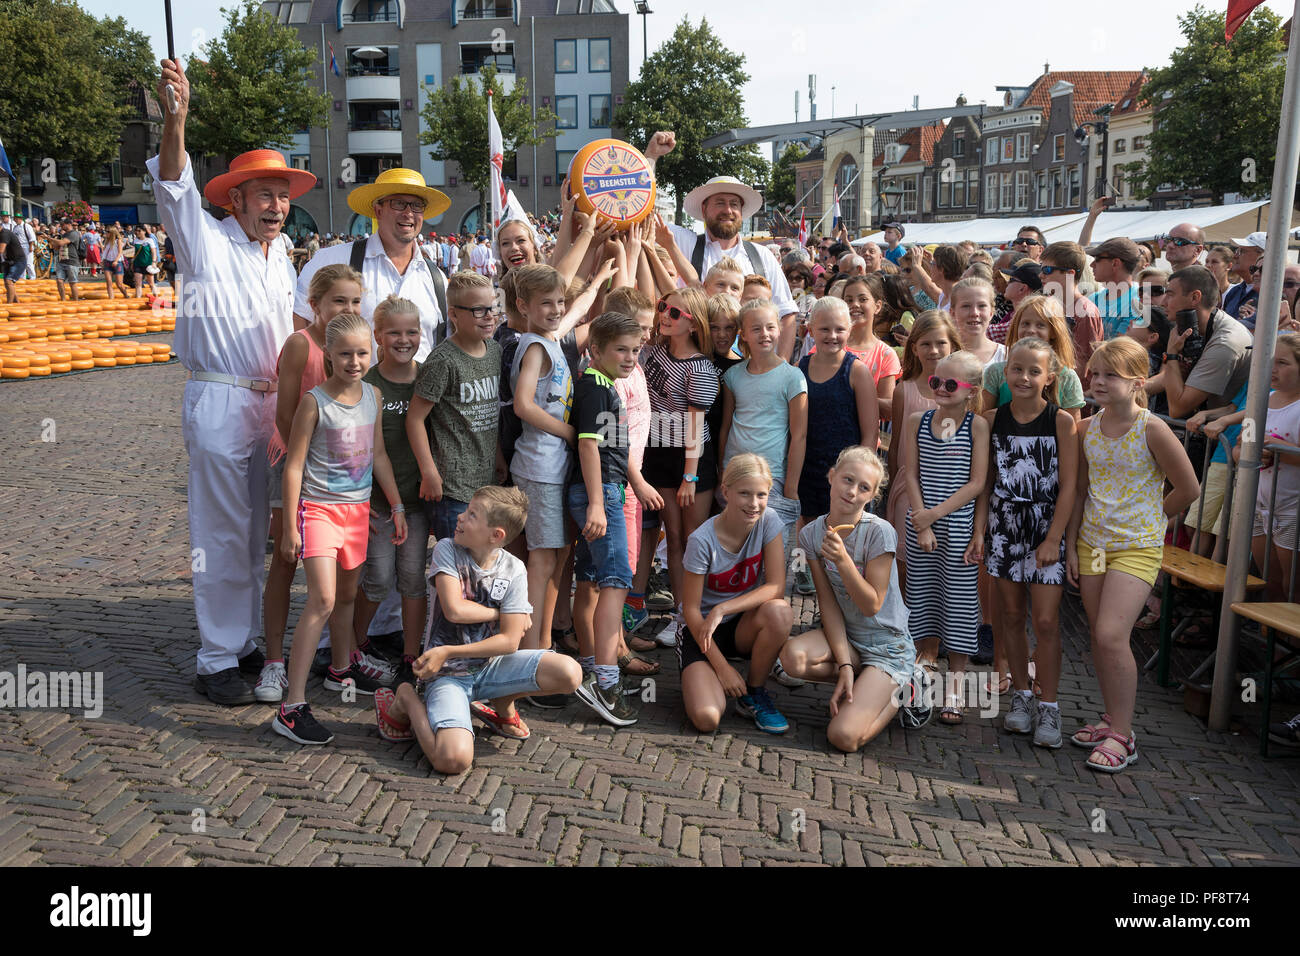 Alkmaar, Netherlands - July 20, 2018: Group of cheese carriers posing with a class of school children on the cheese market Stock Photo